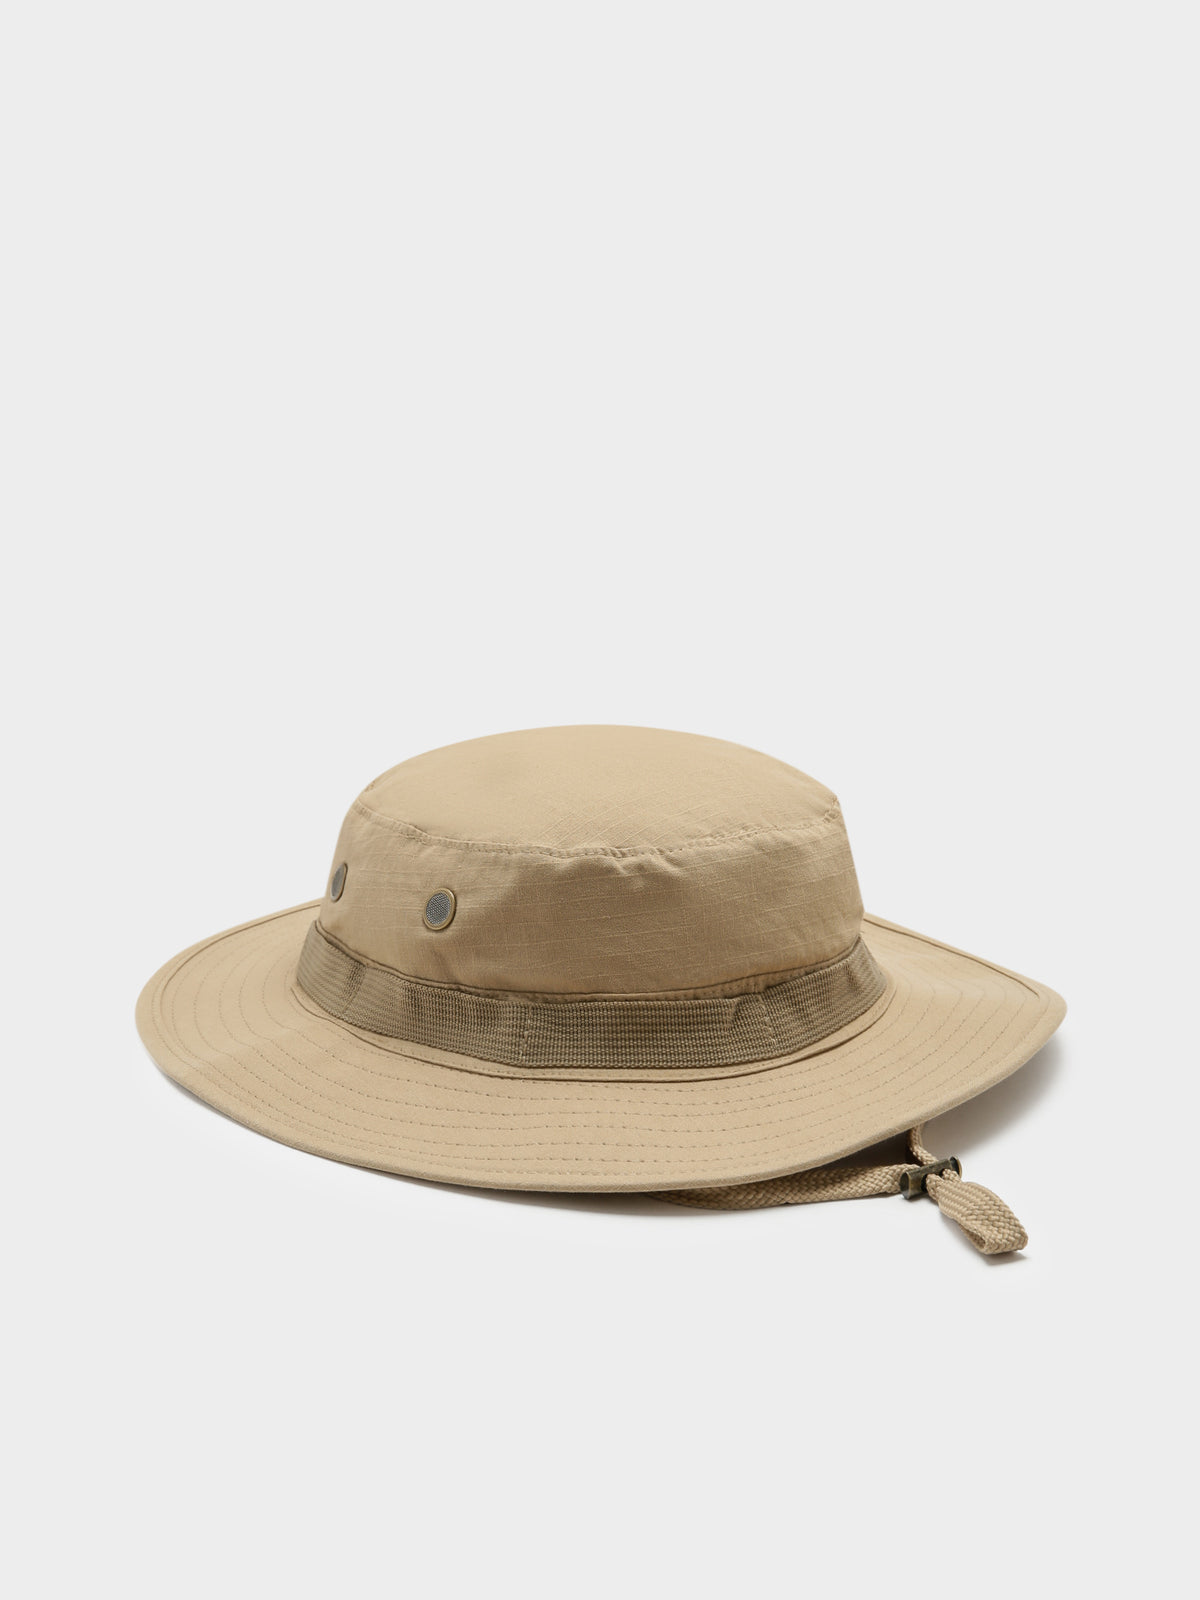 Crowds Boonie Hat in Washed Tan